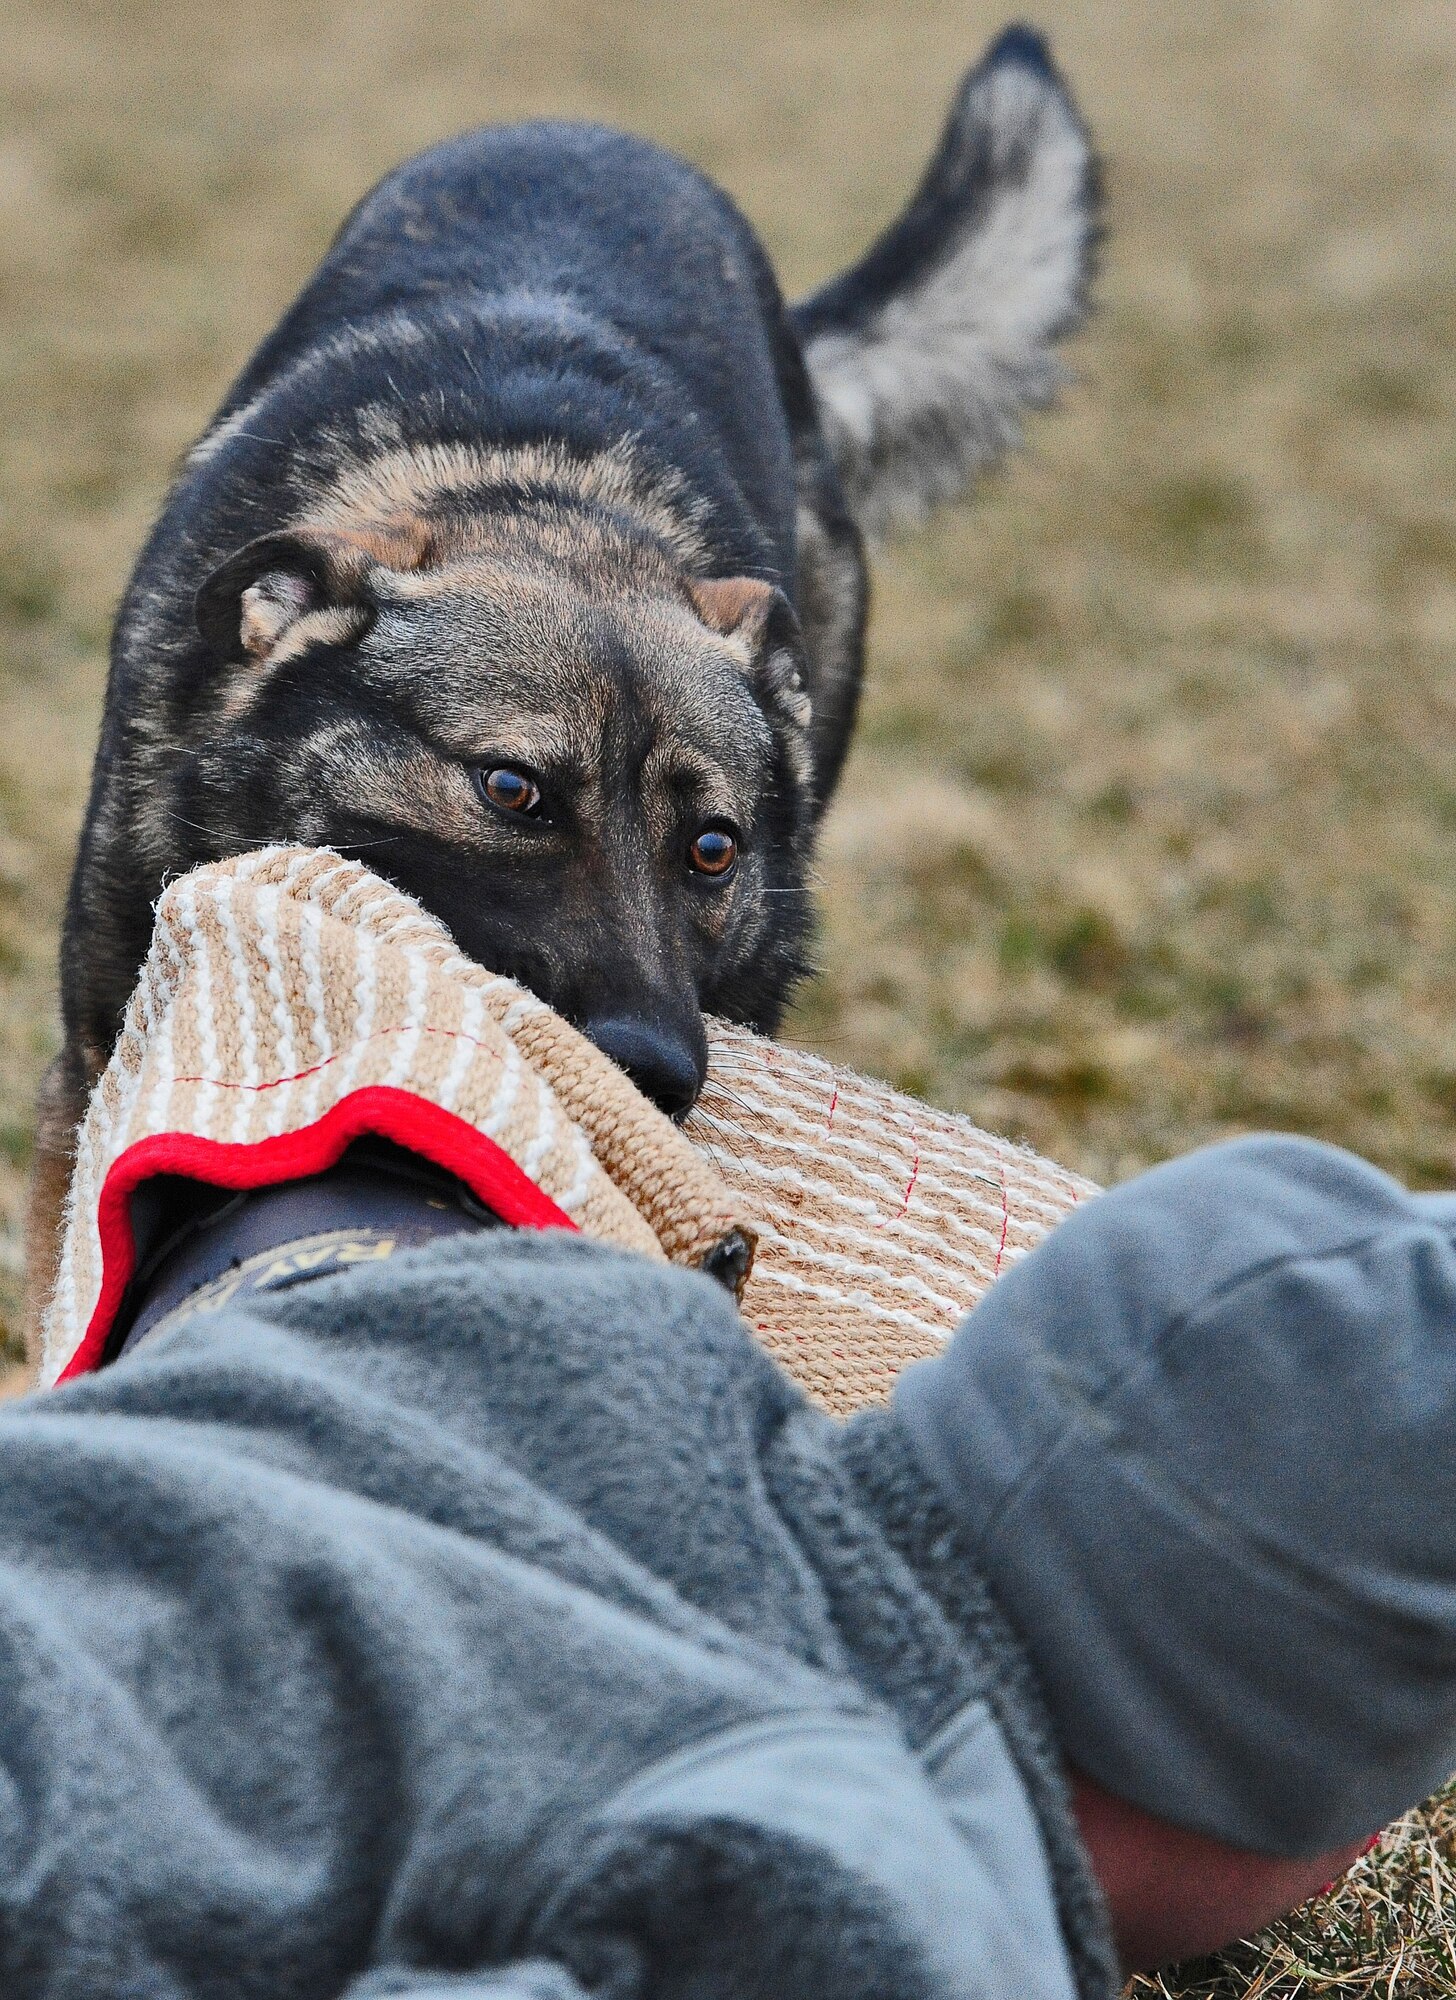 WHITEMAN AIR FORCE BASE, Mo. -- Igore, 509th Security Forces Squadron military working dog, bites the sleeve of an MWD handler and brings him to the ground during a bite sleeve scenario Feb. 15. The bite sleeve scenarios teach the canines to hold on to the body part they bite, helps strengthen their jaws, and builds confidence among them so they are prepared when responding to a real-world scenario. (U.S. Air Force photo/Senior Airman Nick Wilson)